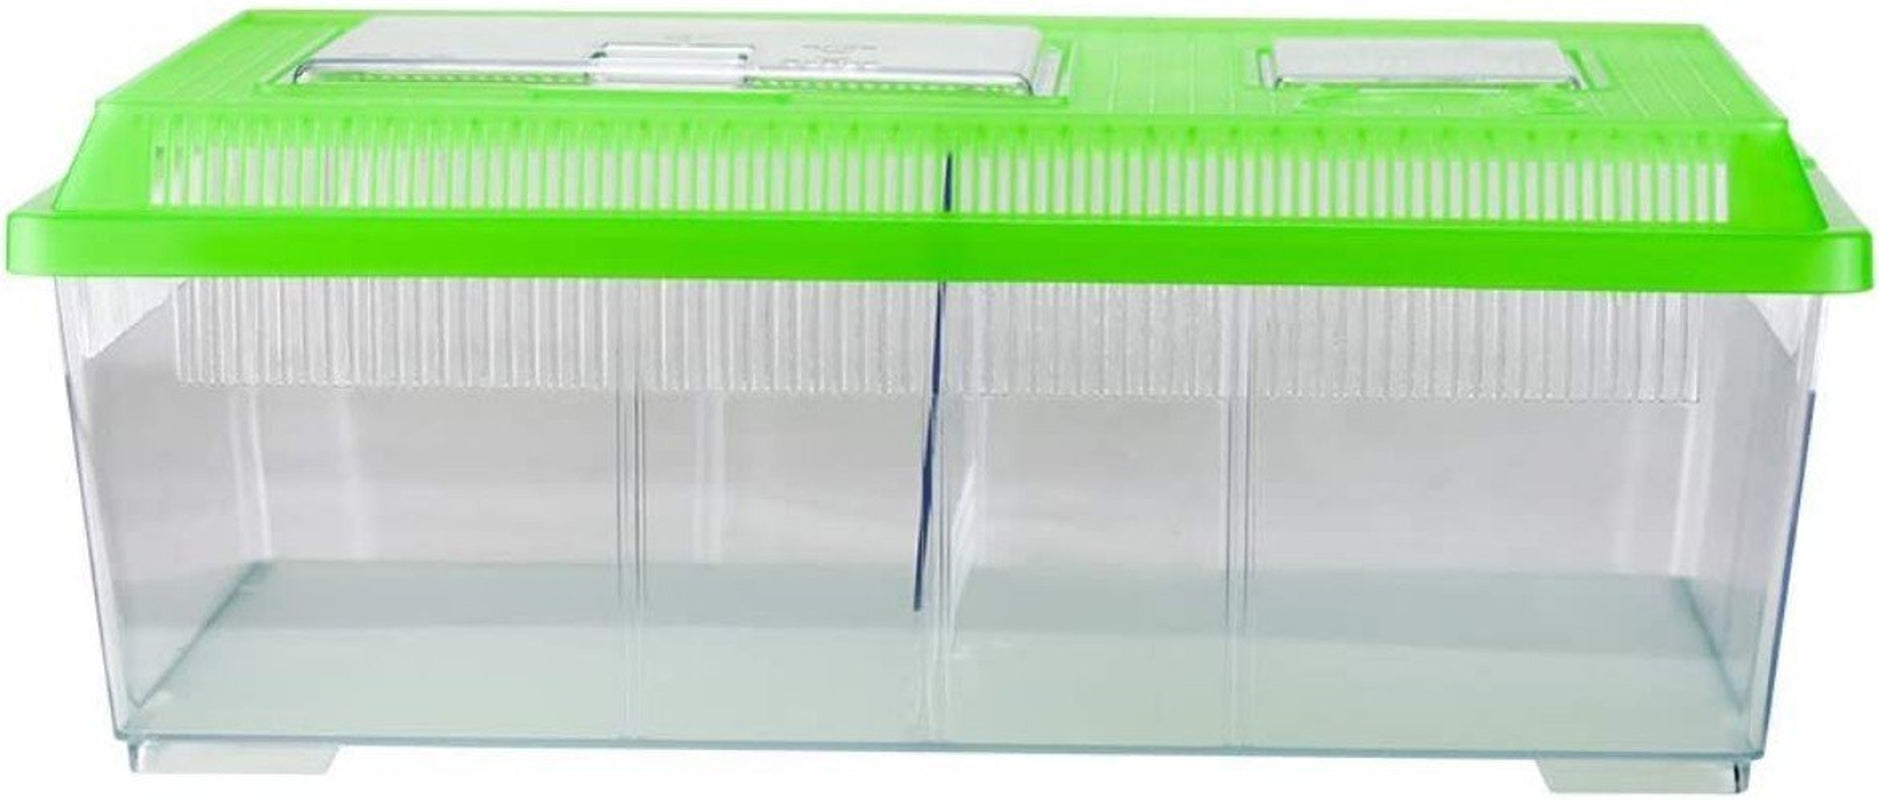 Large - 2 Count Lees Reptile Ranch Ventilated Reptile and Amphibian Rectangle Habitat with Lid Animals & Pet Supplies > Pet Supplies > Small Animal Supplies > Small Animal Habitat Accessories Lees   